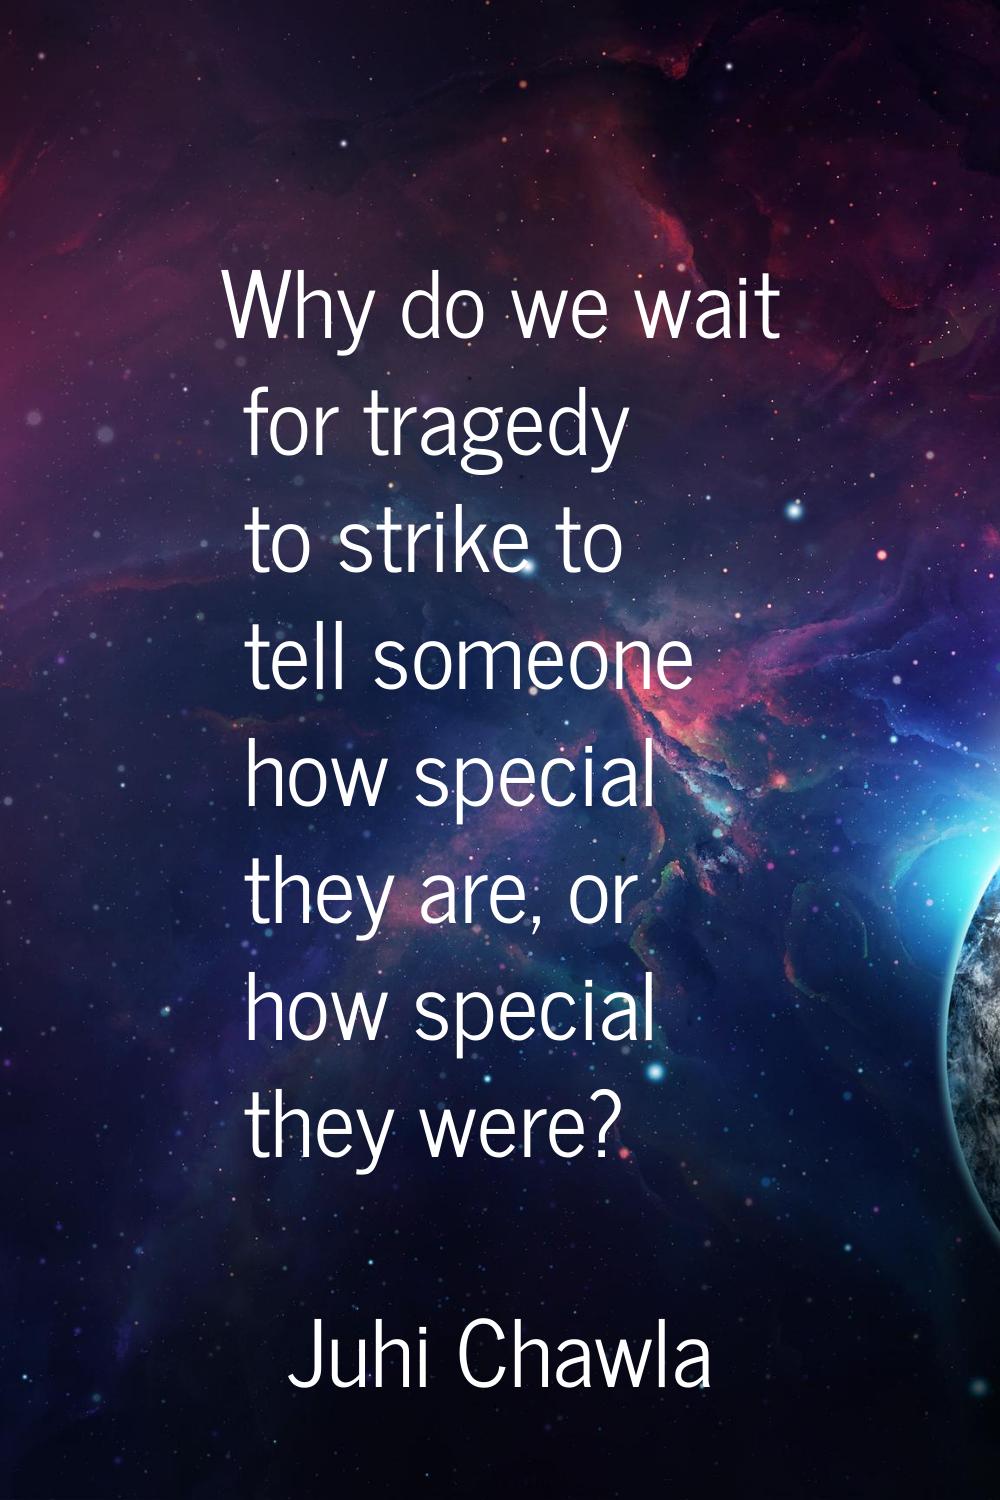 Why do we wait for tragedy to strike to tell someone how special they are, or how special they were